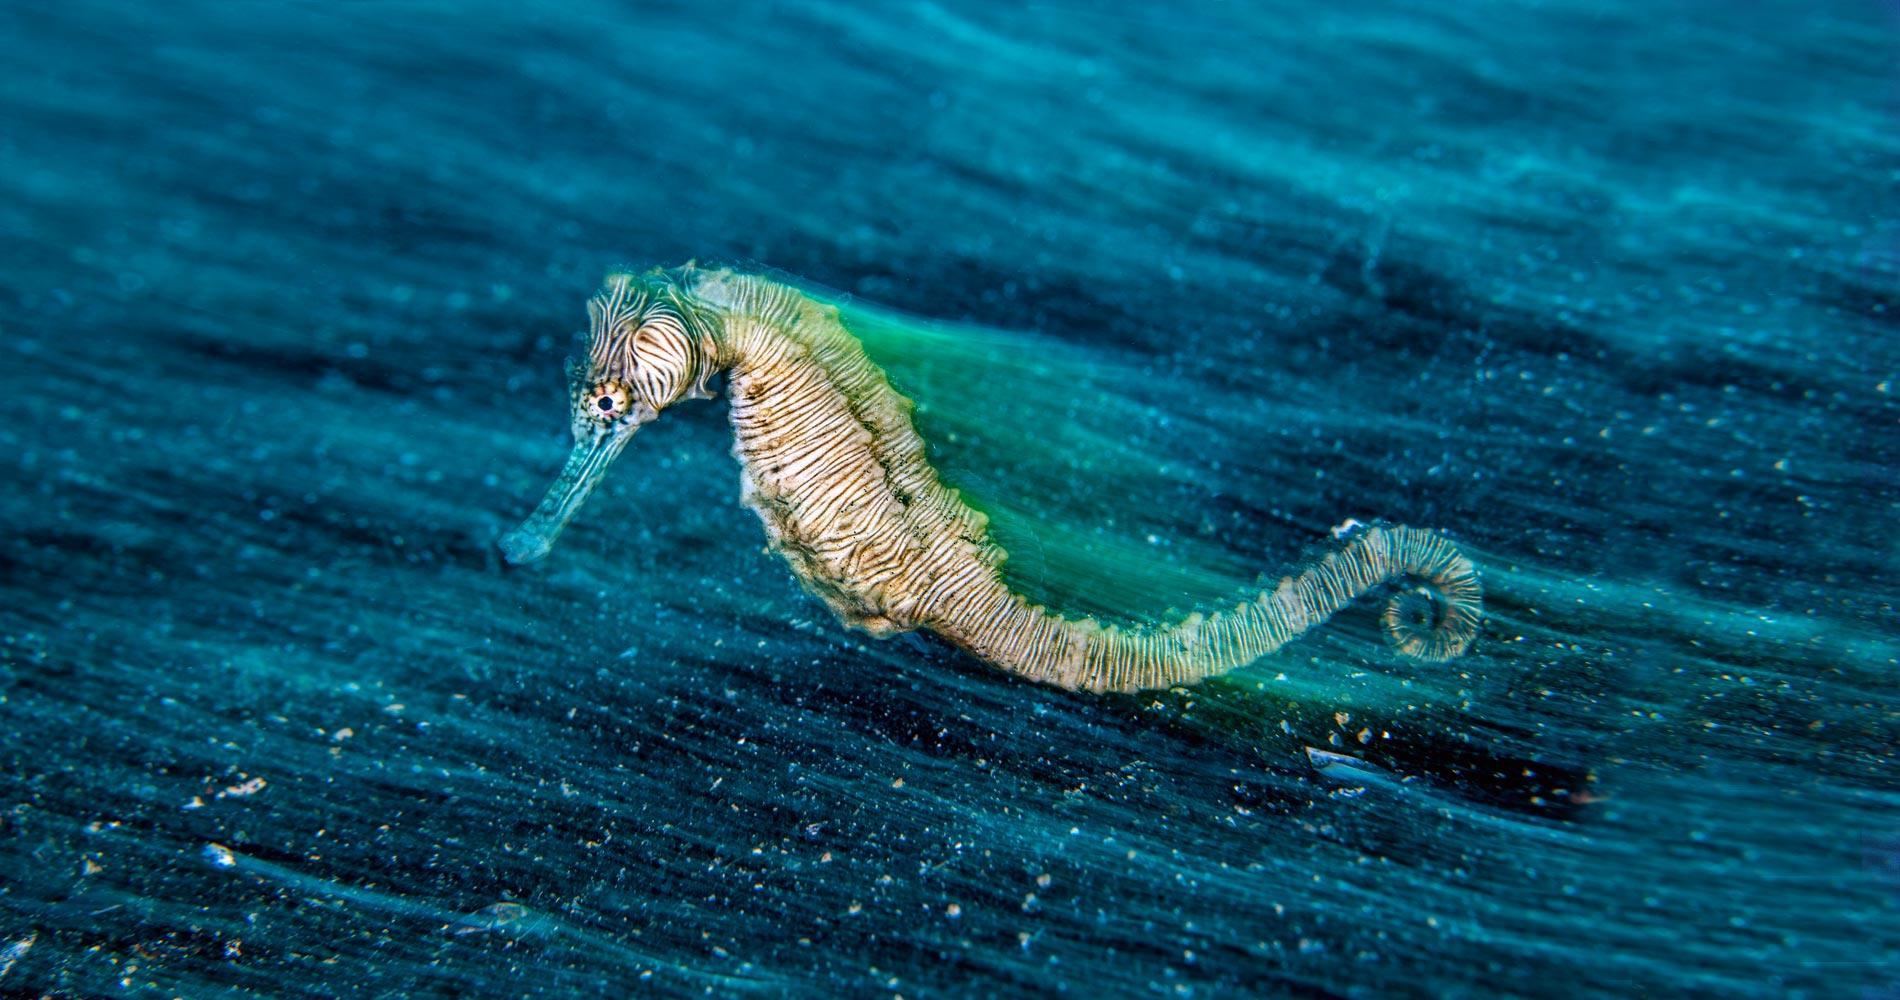 Saving the Seahorse: Here Today Gone Tomorrow